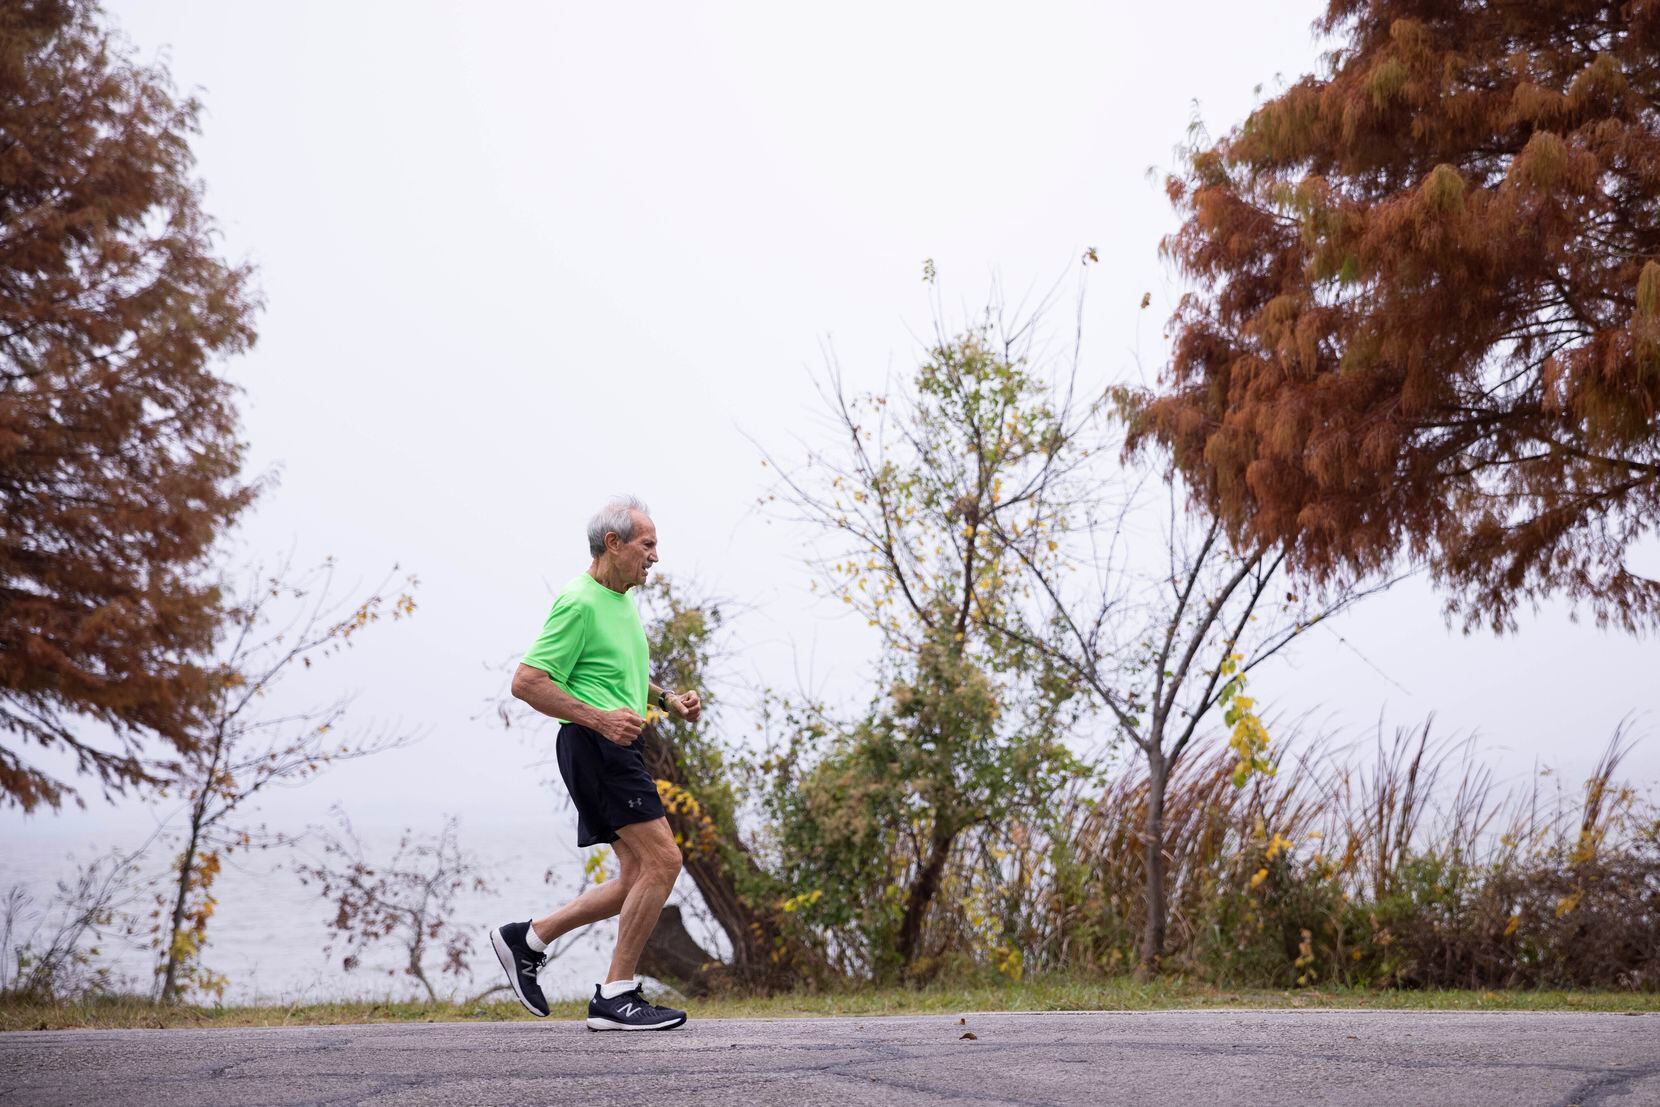 James Thruston, 84, runs during a photoshoot following his usual morning run on Friday, Dec. 3, 2021, at White Rock Lake in Dallas. (Juan Figueroa/The Dallas Morning News)